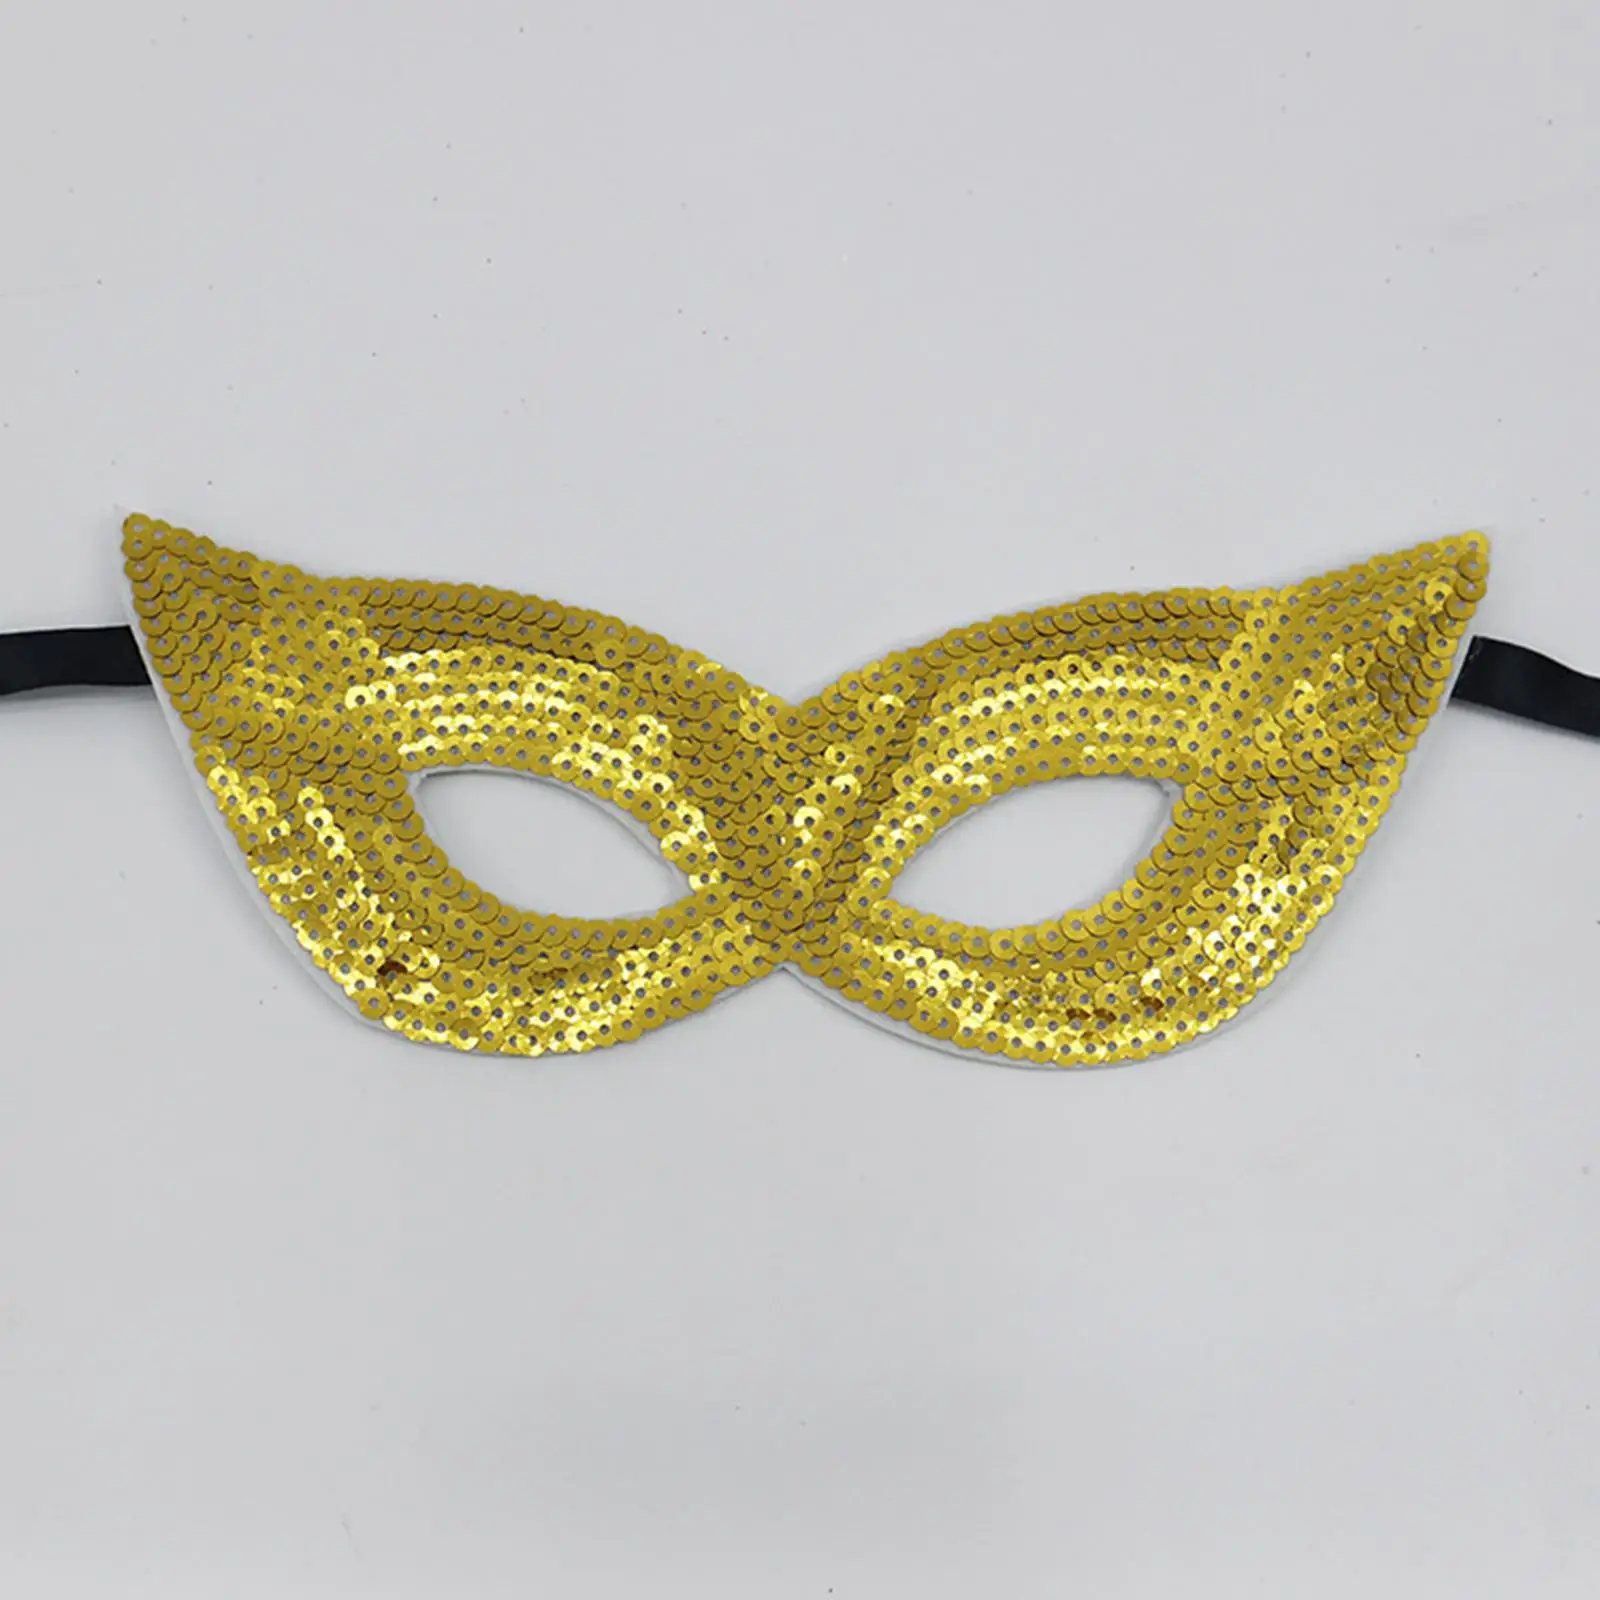 Glitter Masquerade Eye Mask Sequin Party Mask Half Cover Fancy Dress for Carnival Prom